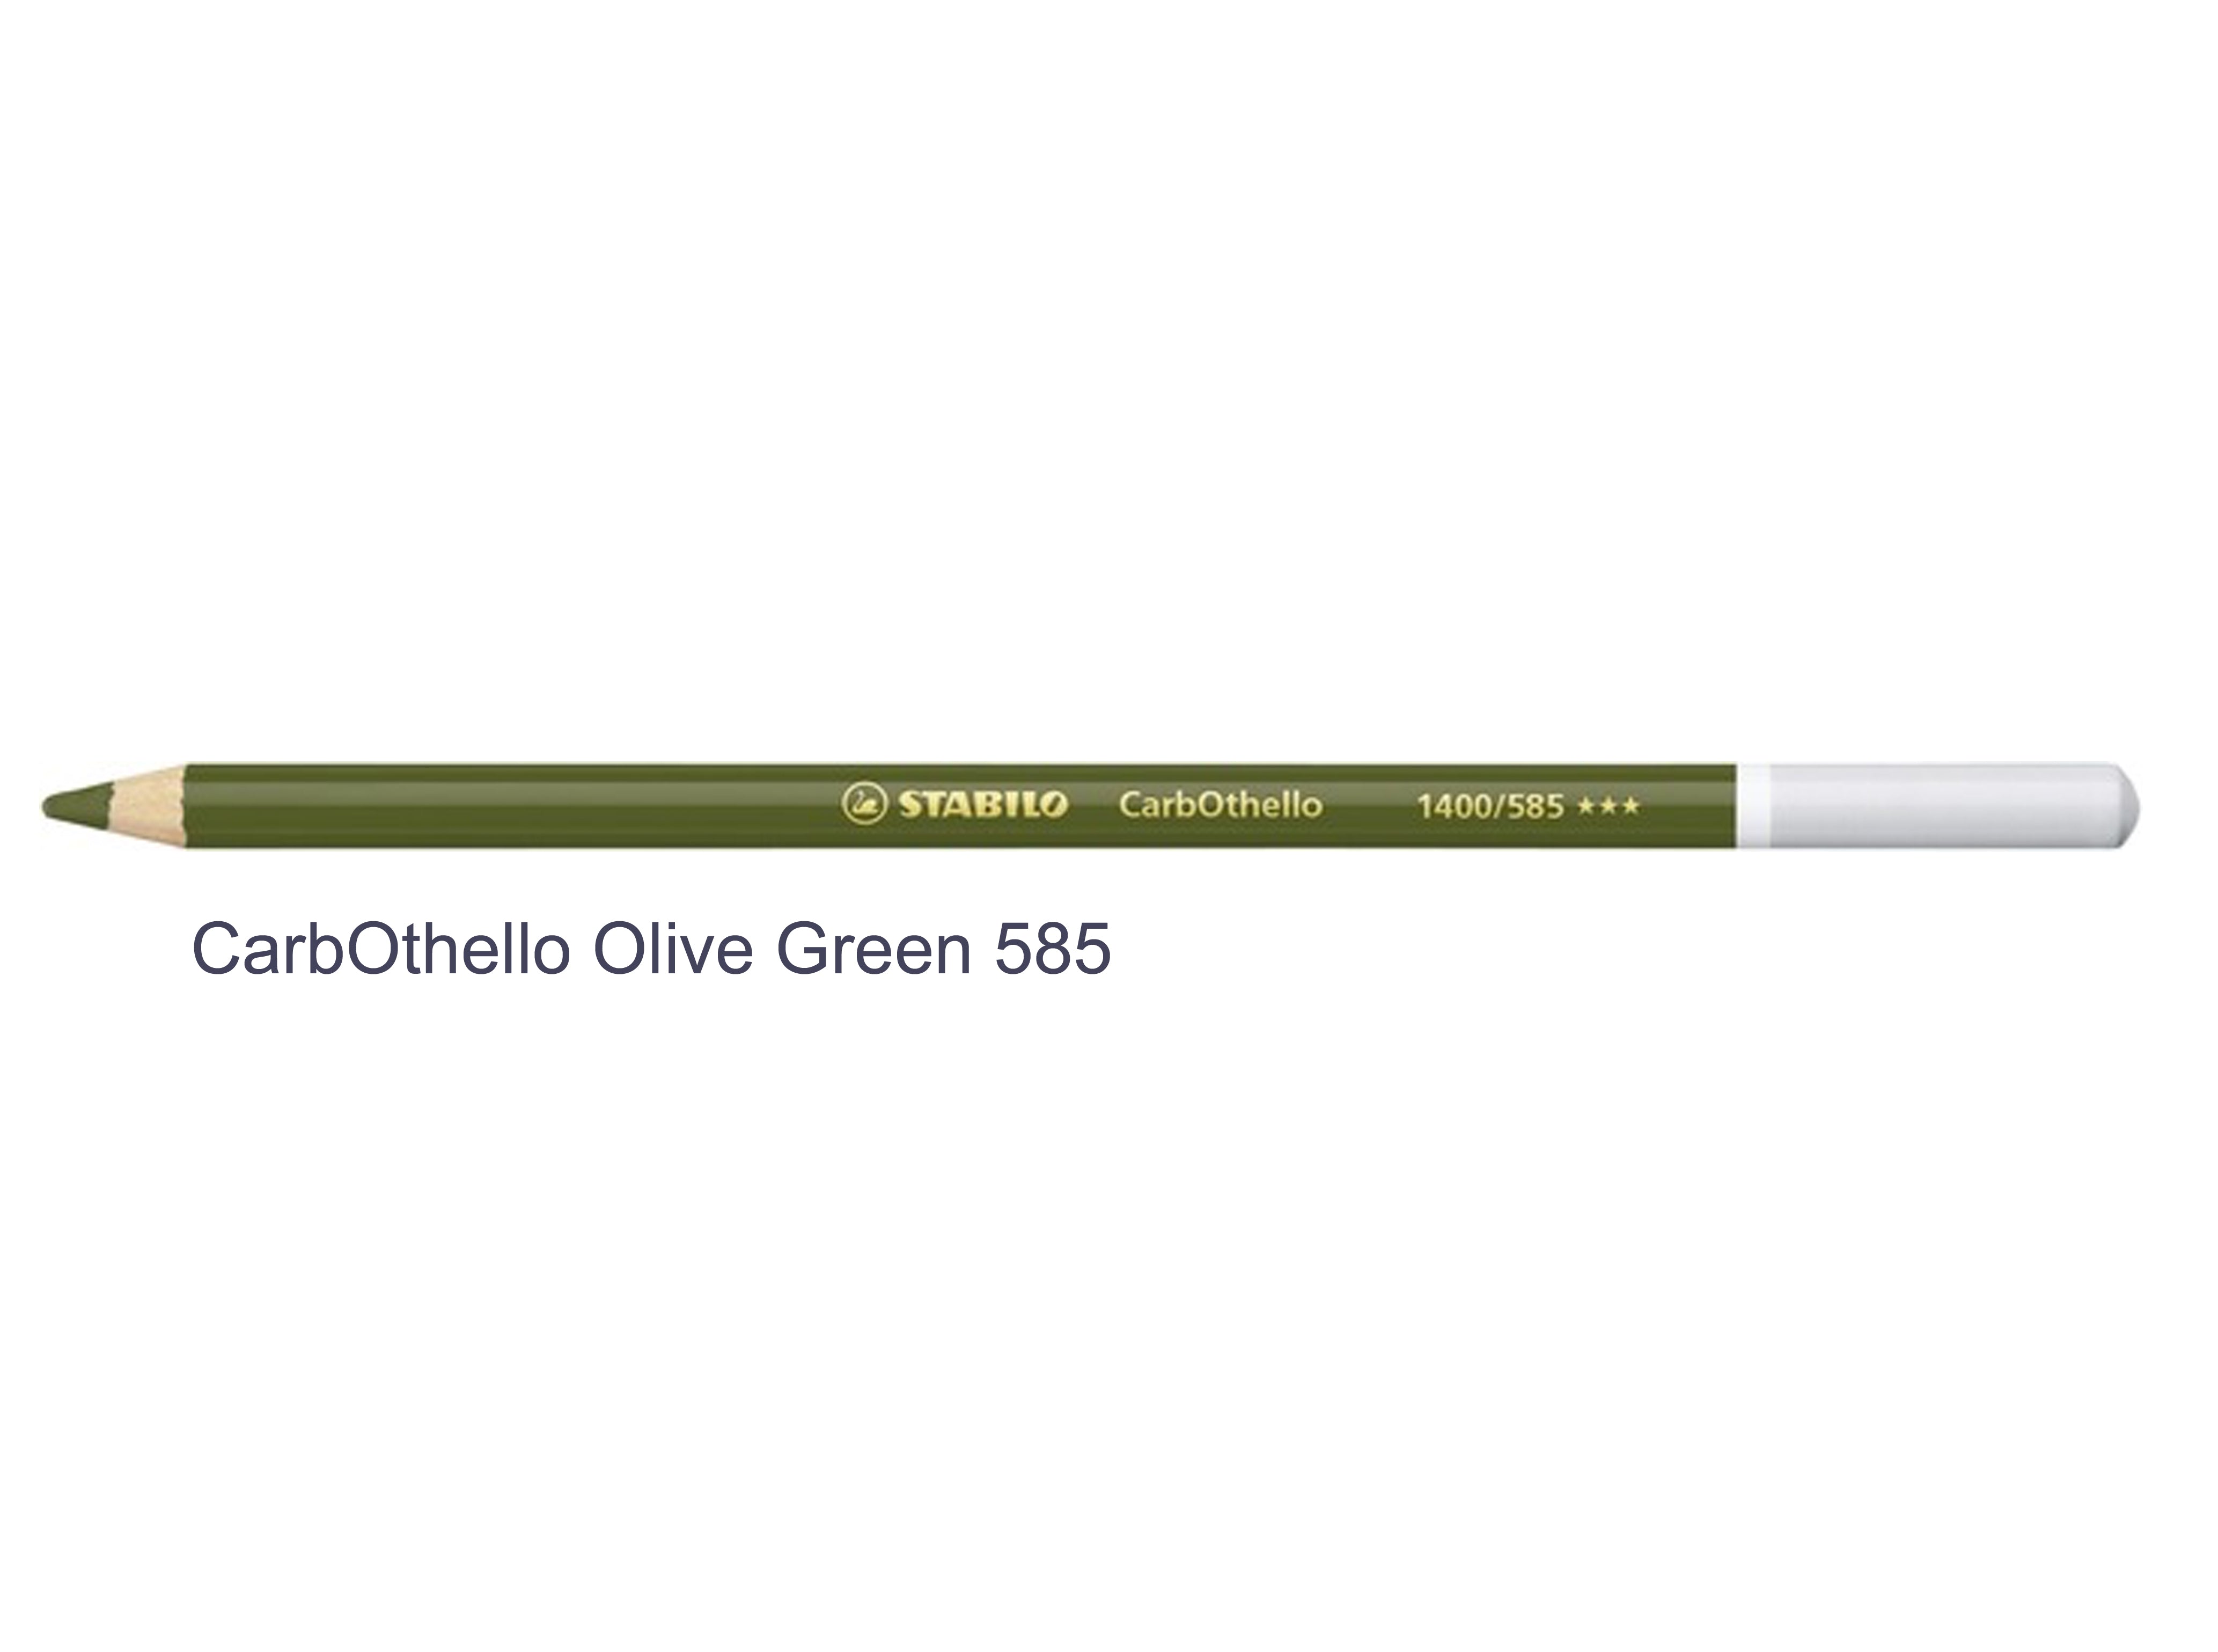 Olive green 585 STABILO CarbOthello chalk-pastel pencils